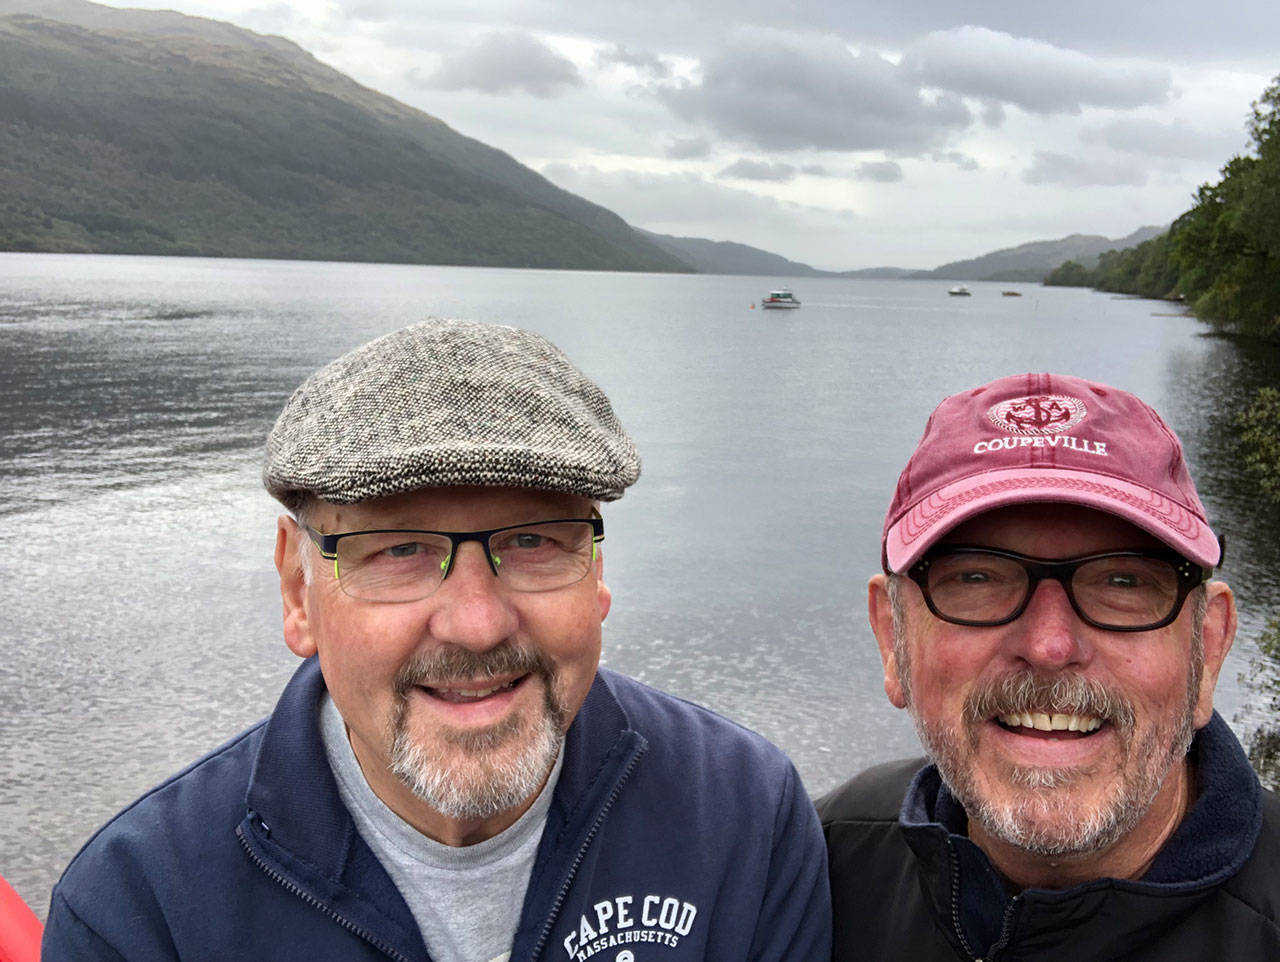 Harry Anderson, left, and his husband Terry Bible during their vacation at Loch Lomond in Scotland in September. Photo provided